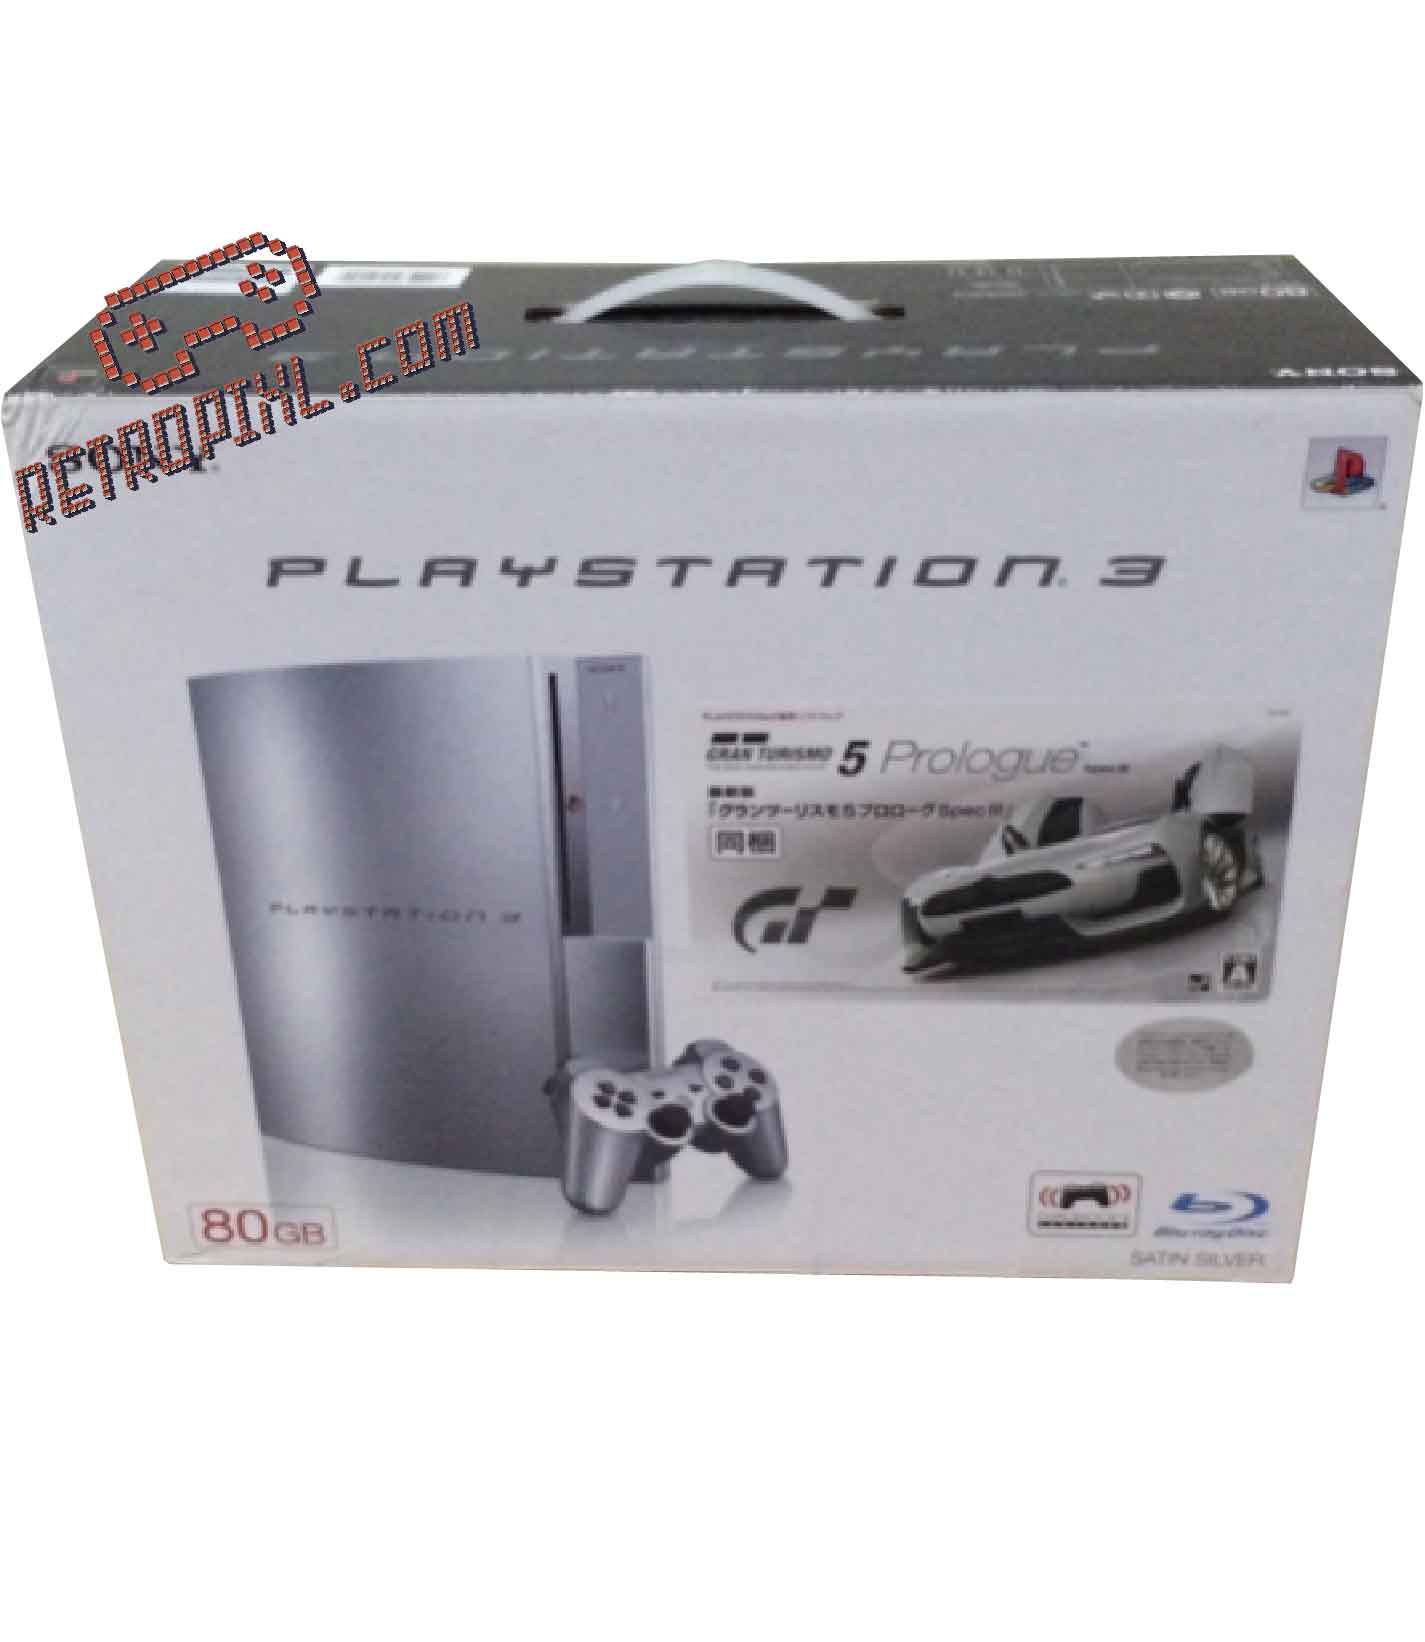 Gran Turismo 5: Collector's Edition (Sony PS3) - Game - Sony PlayStation 3